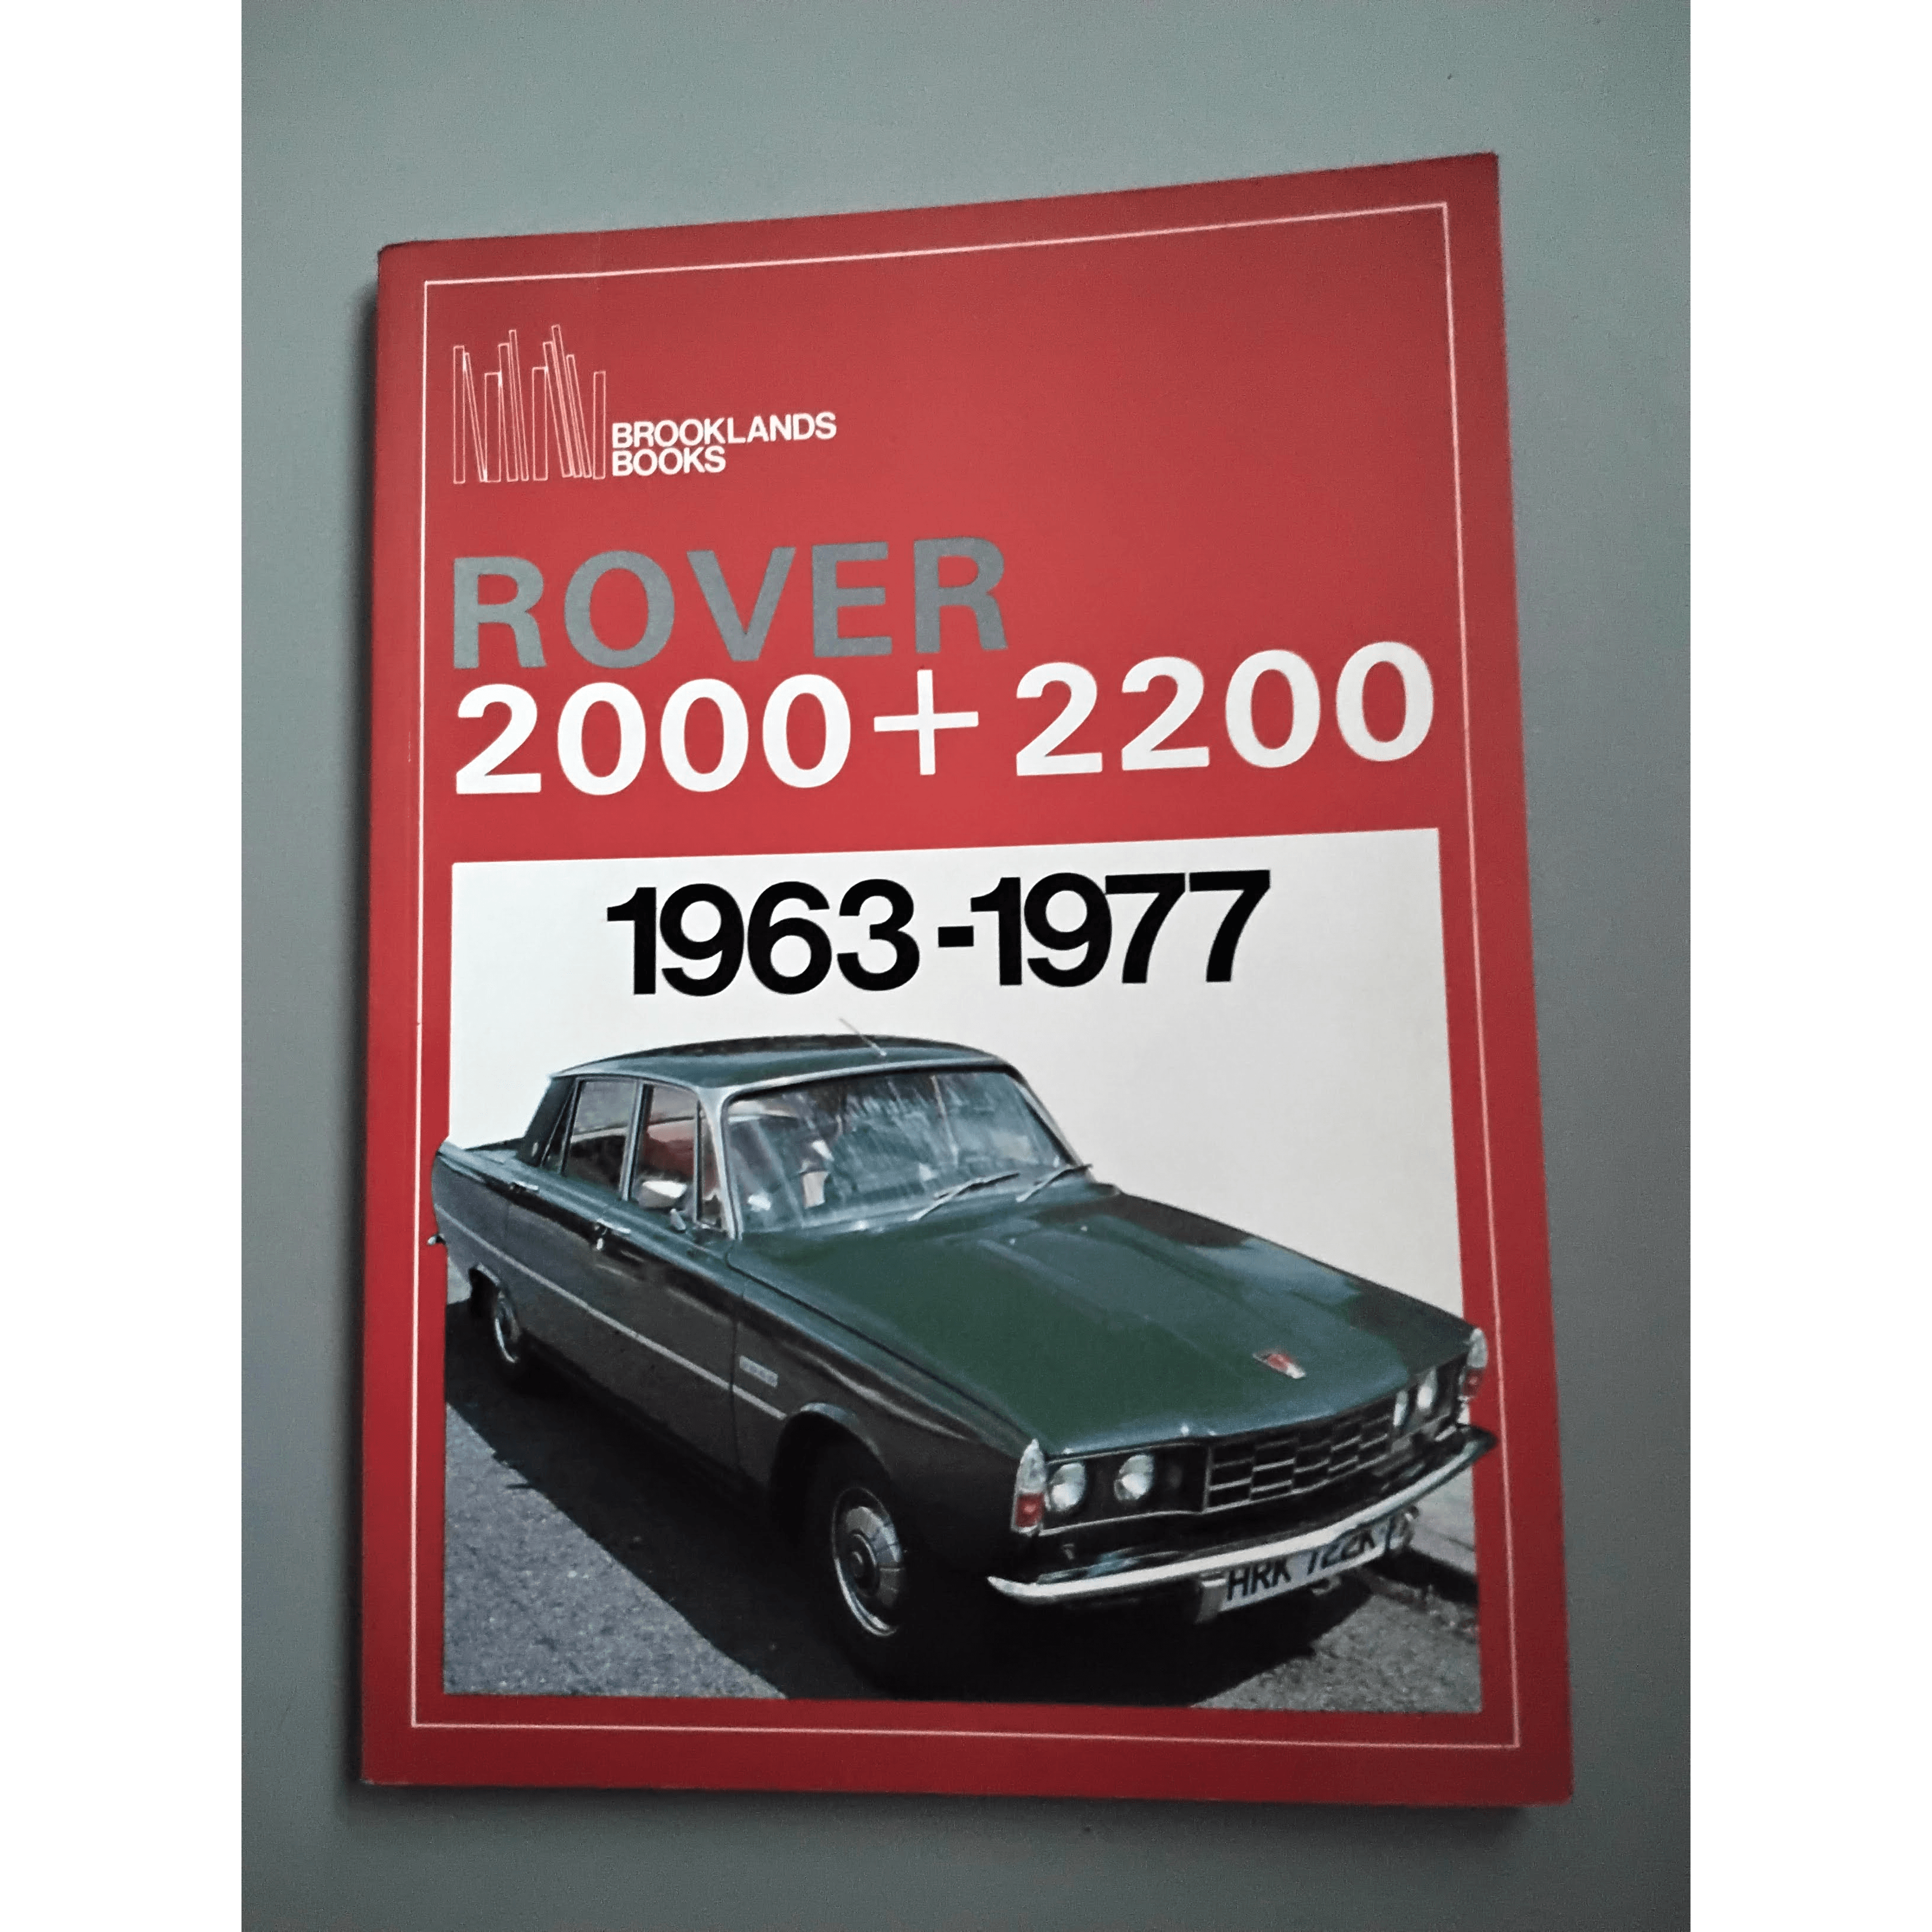 Rover 2000 + 2200: 1963-1977 by R.M. Clarke - Berry Smink British Car Parts